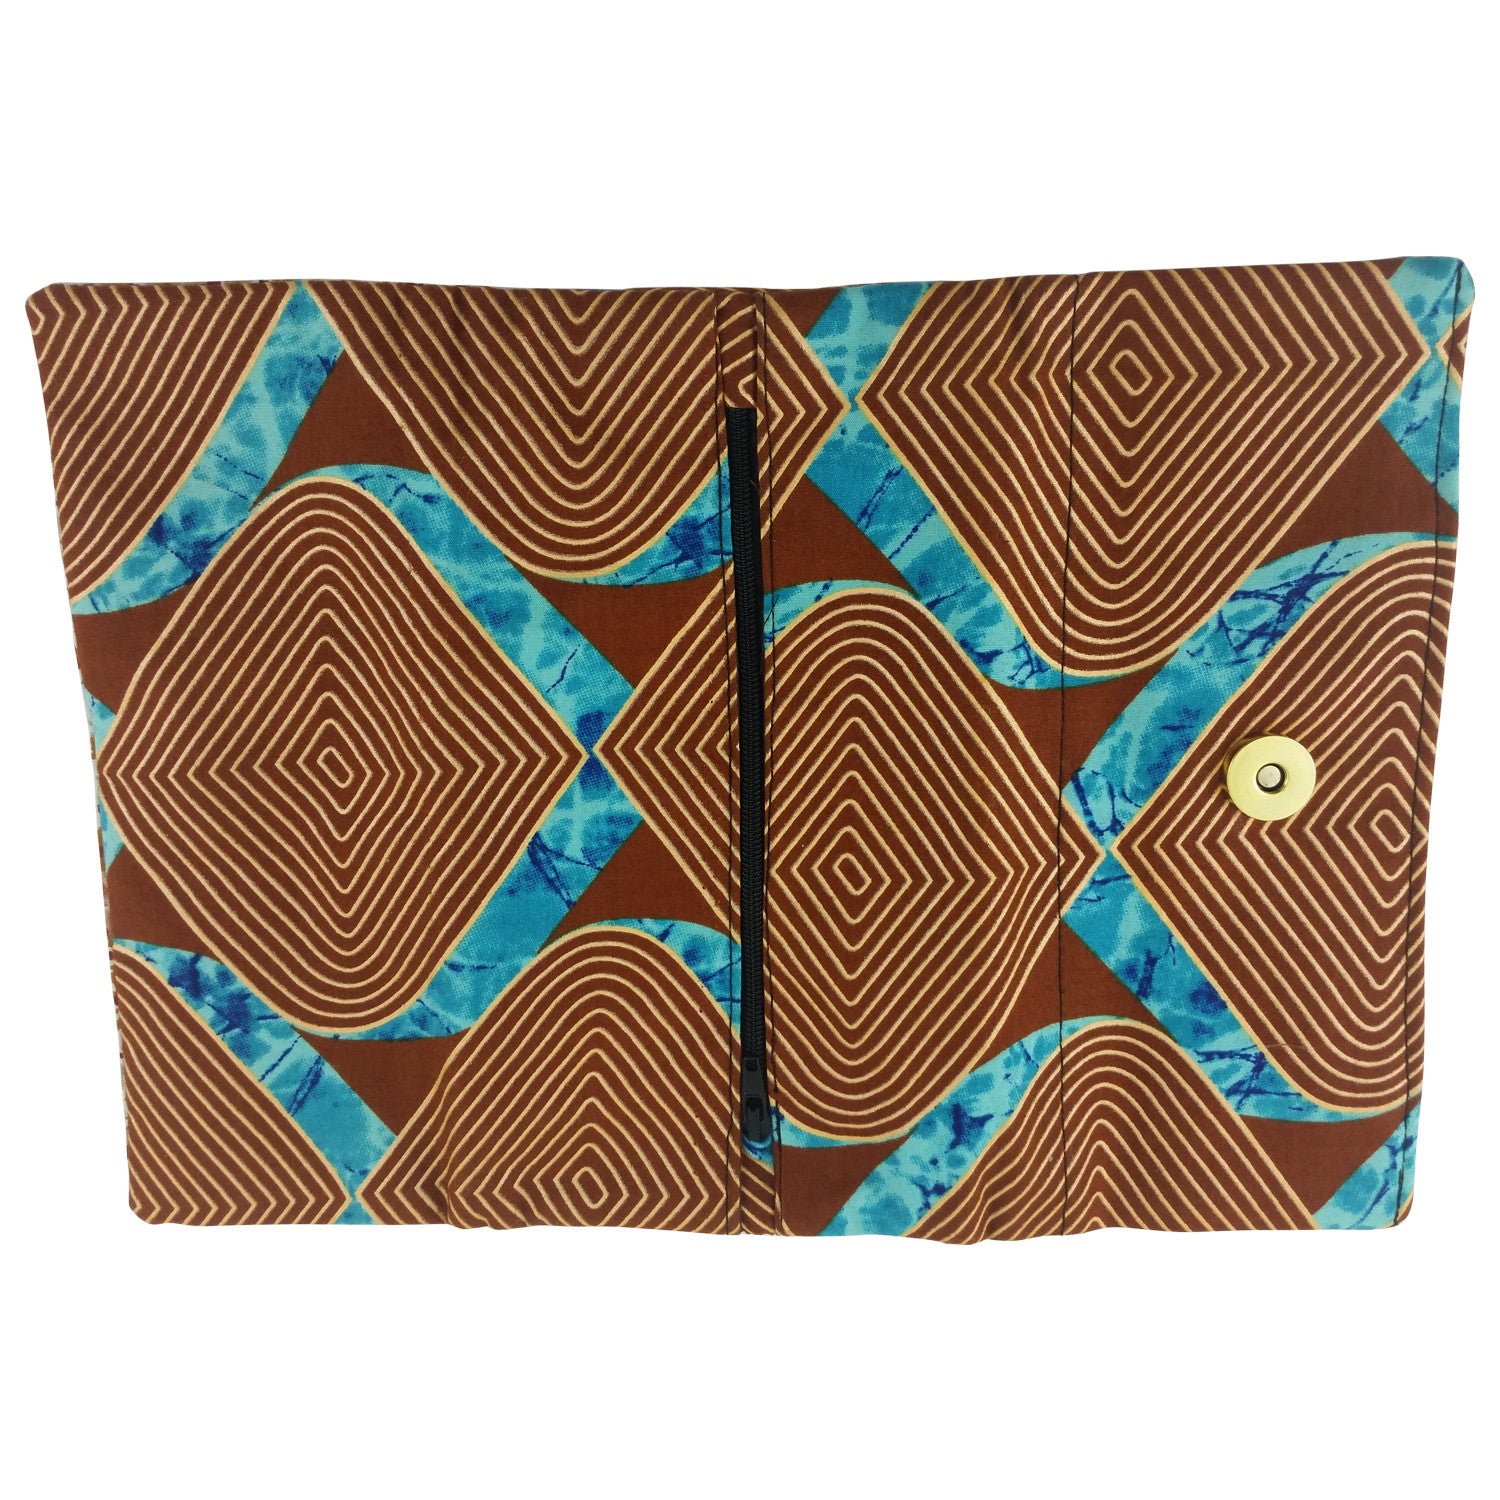 4 of 4: East African Kitenge Fabric Women's Wallet (Brown, Beige and Blue)